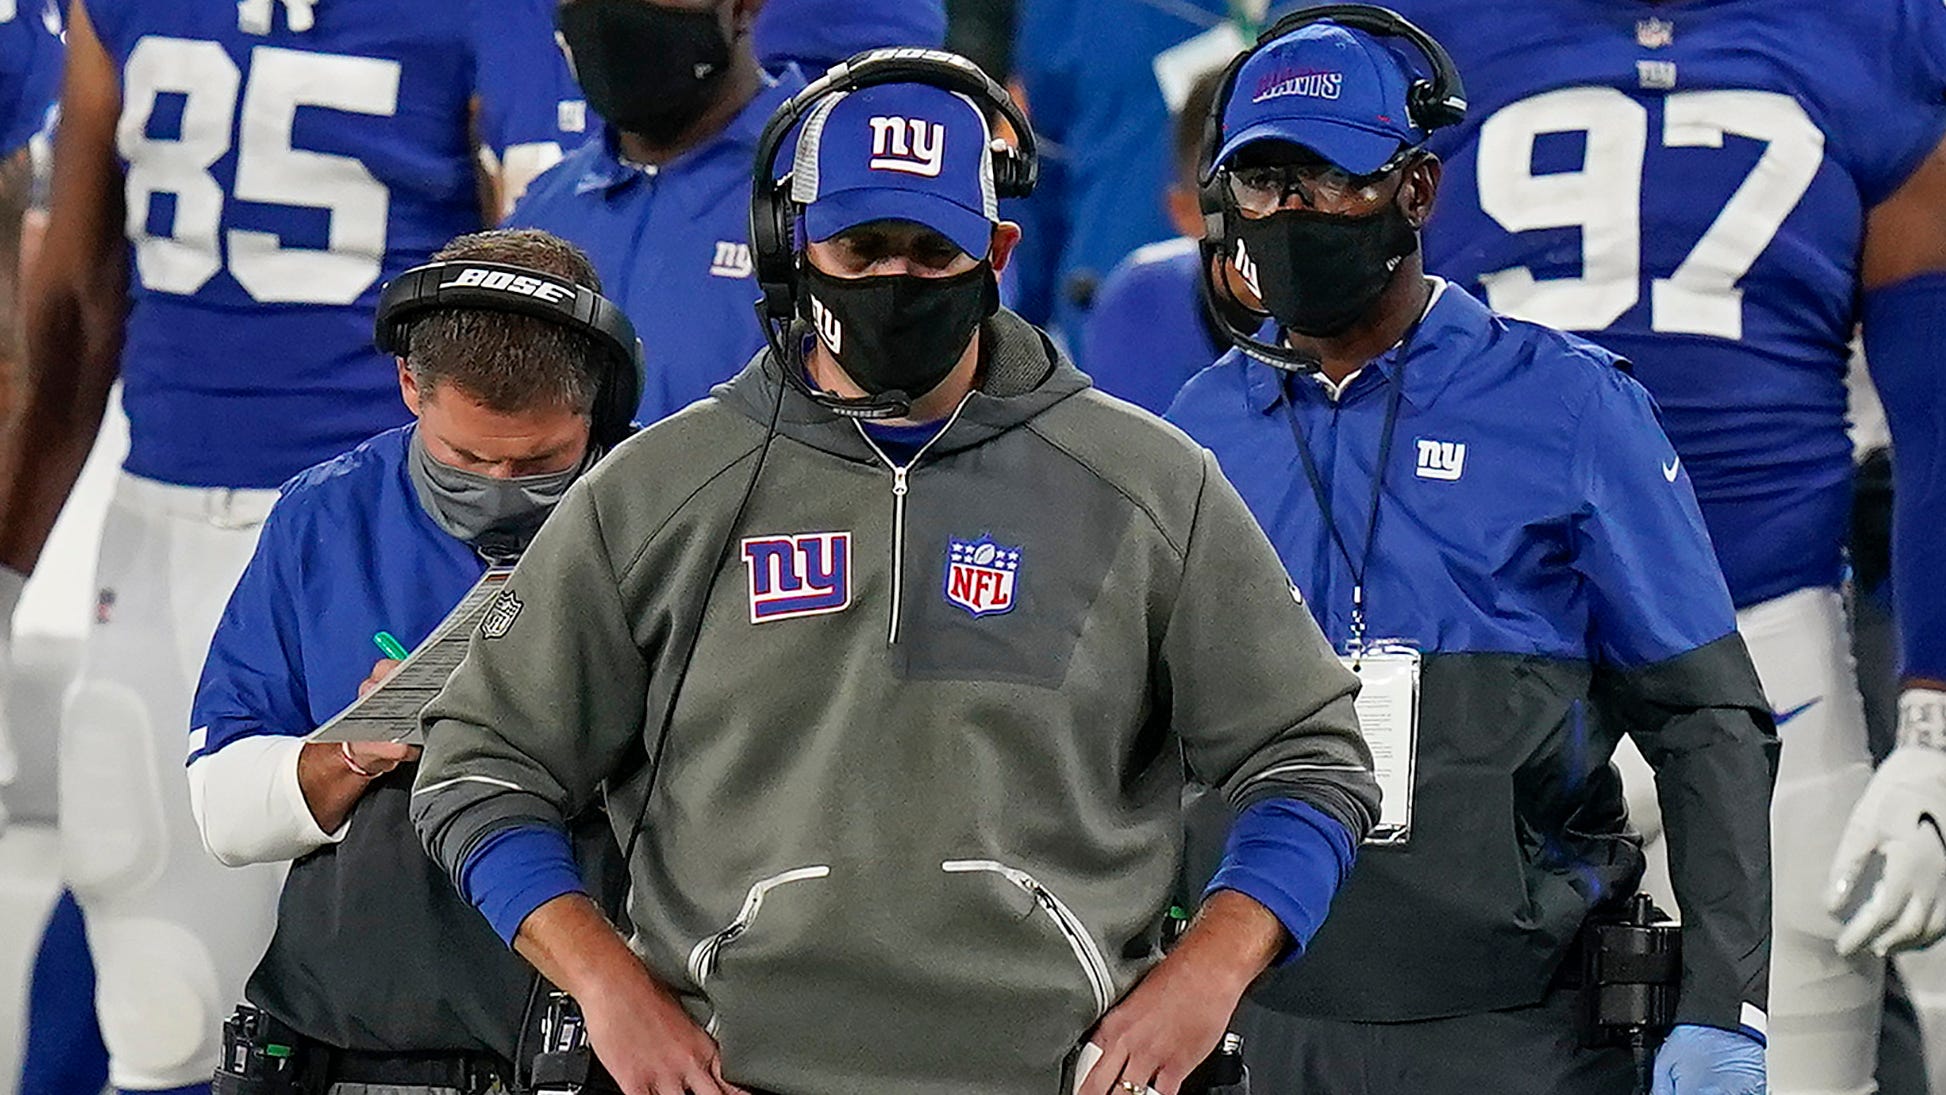 NY Giants 2021 schedule set, will face Broncos in Week 1